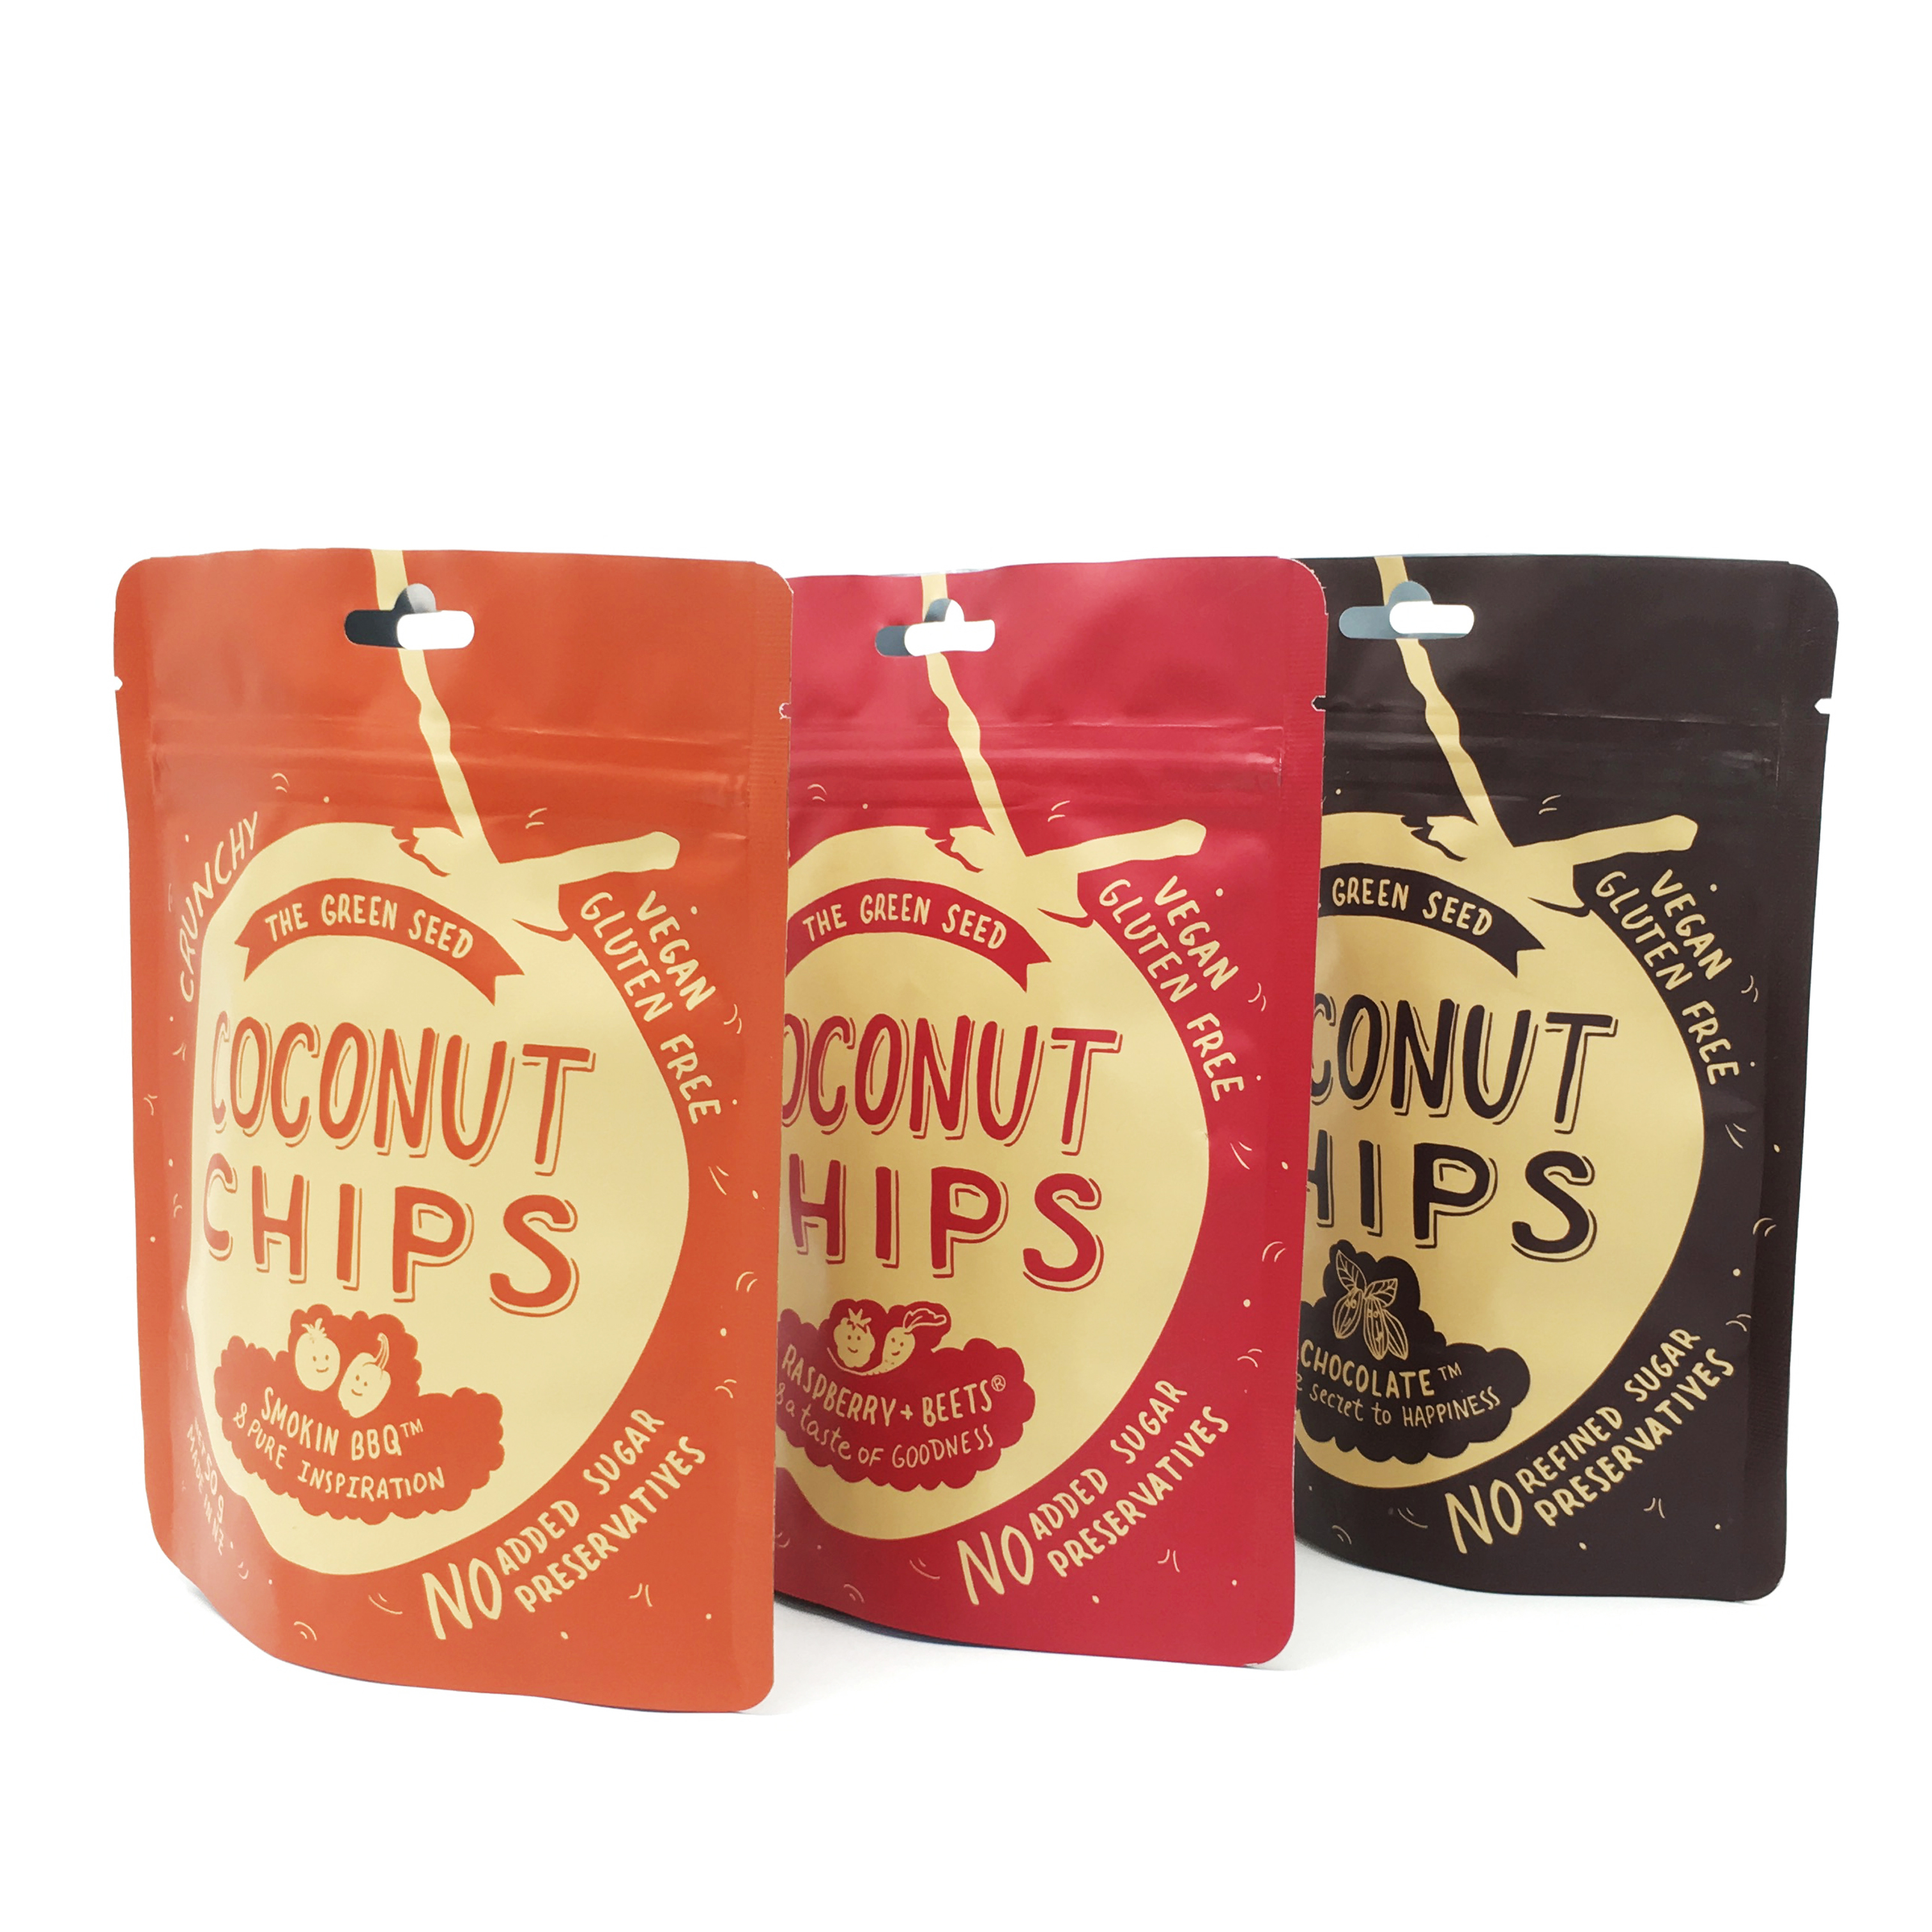 Comprar Stand Up Foil Pouch con Ziplock, Stand Up Foil Pouch con Ziplock Precios, Stand Up Foil Pouch con Ziplock Marcas, Stand Up Foil Pouch con Ziplock Fabricante, Stand Up Foil Pouch con Ziplock Citas, Stand Up Foil Pouch con Ziplock Empresa.